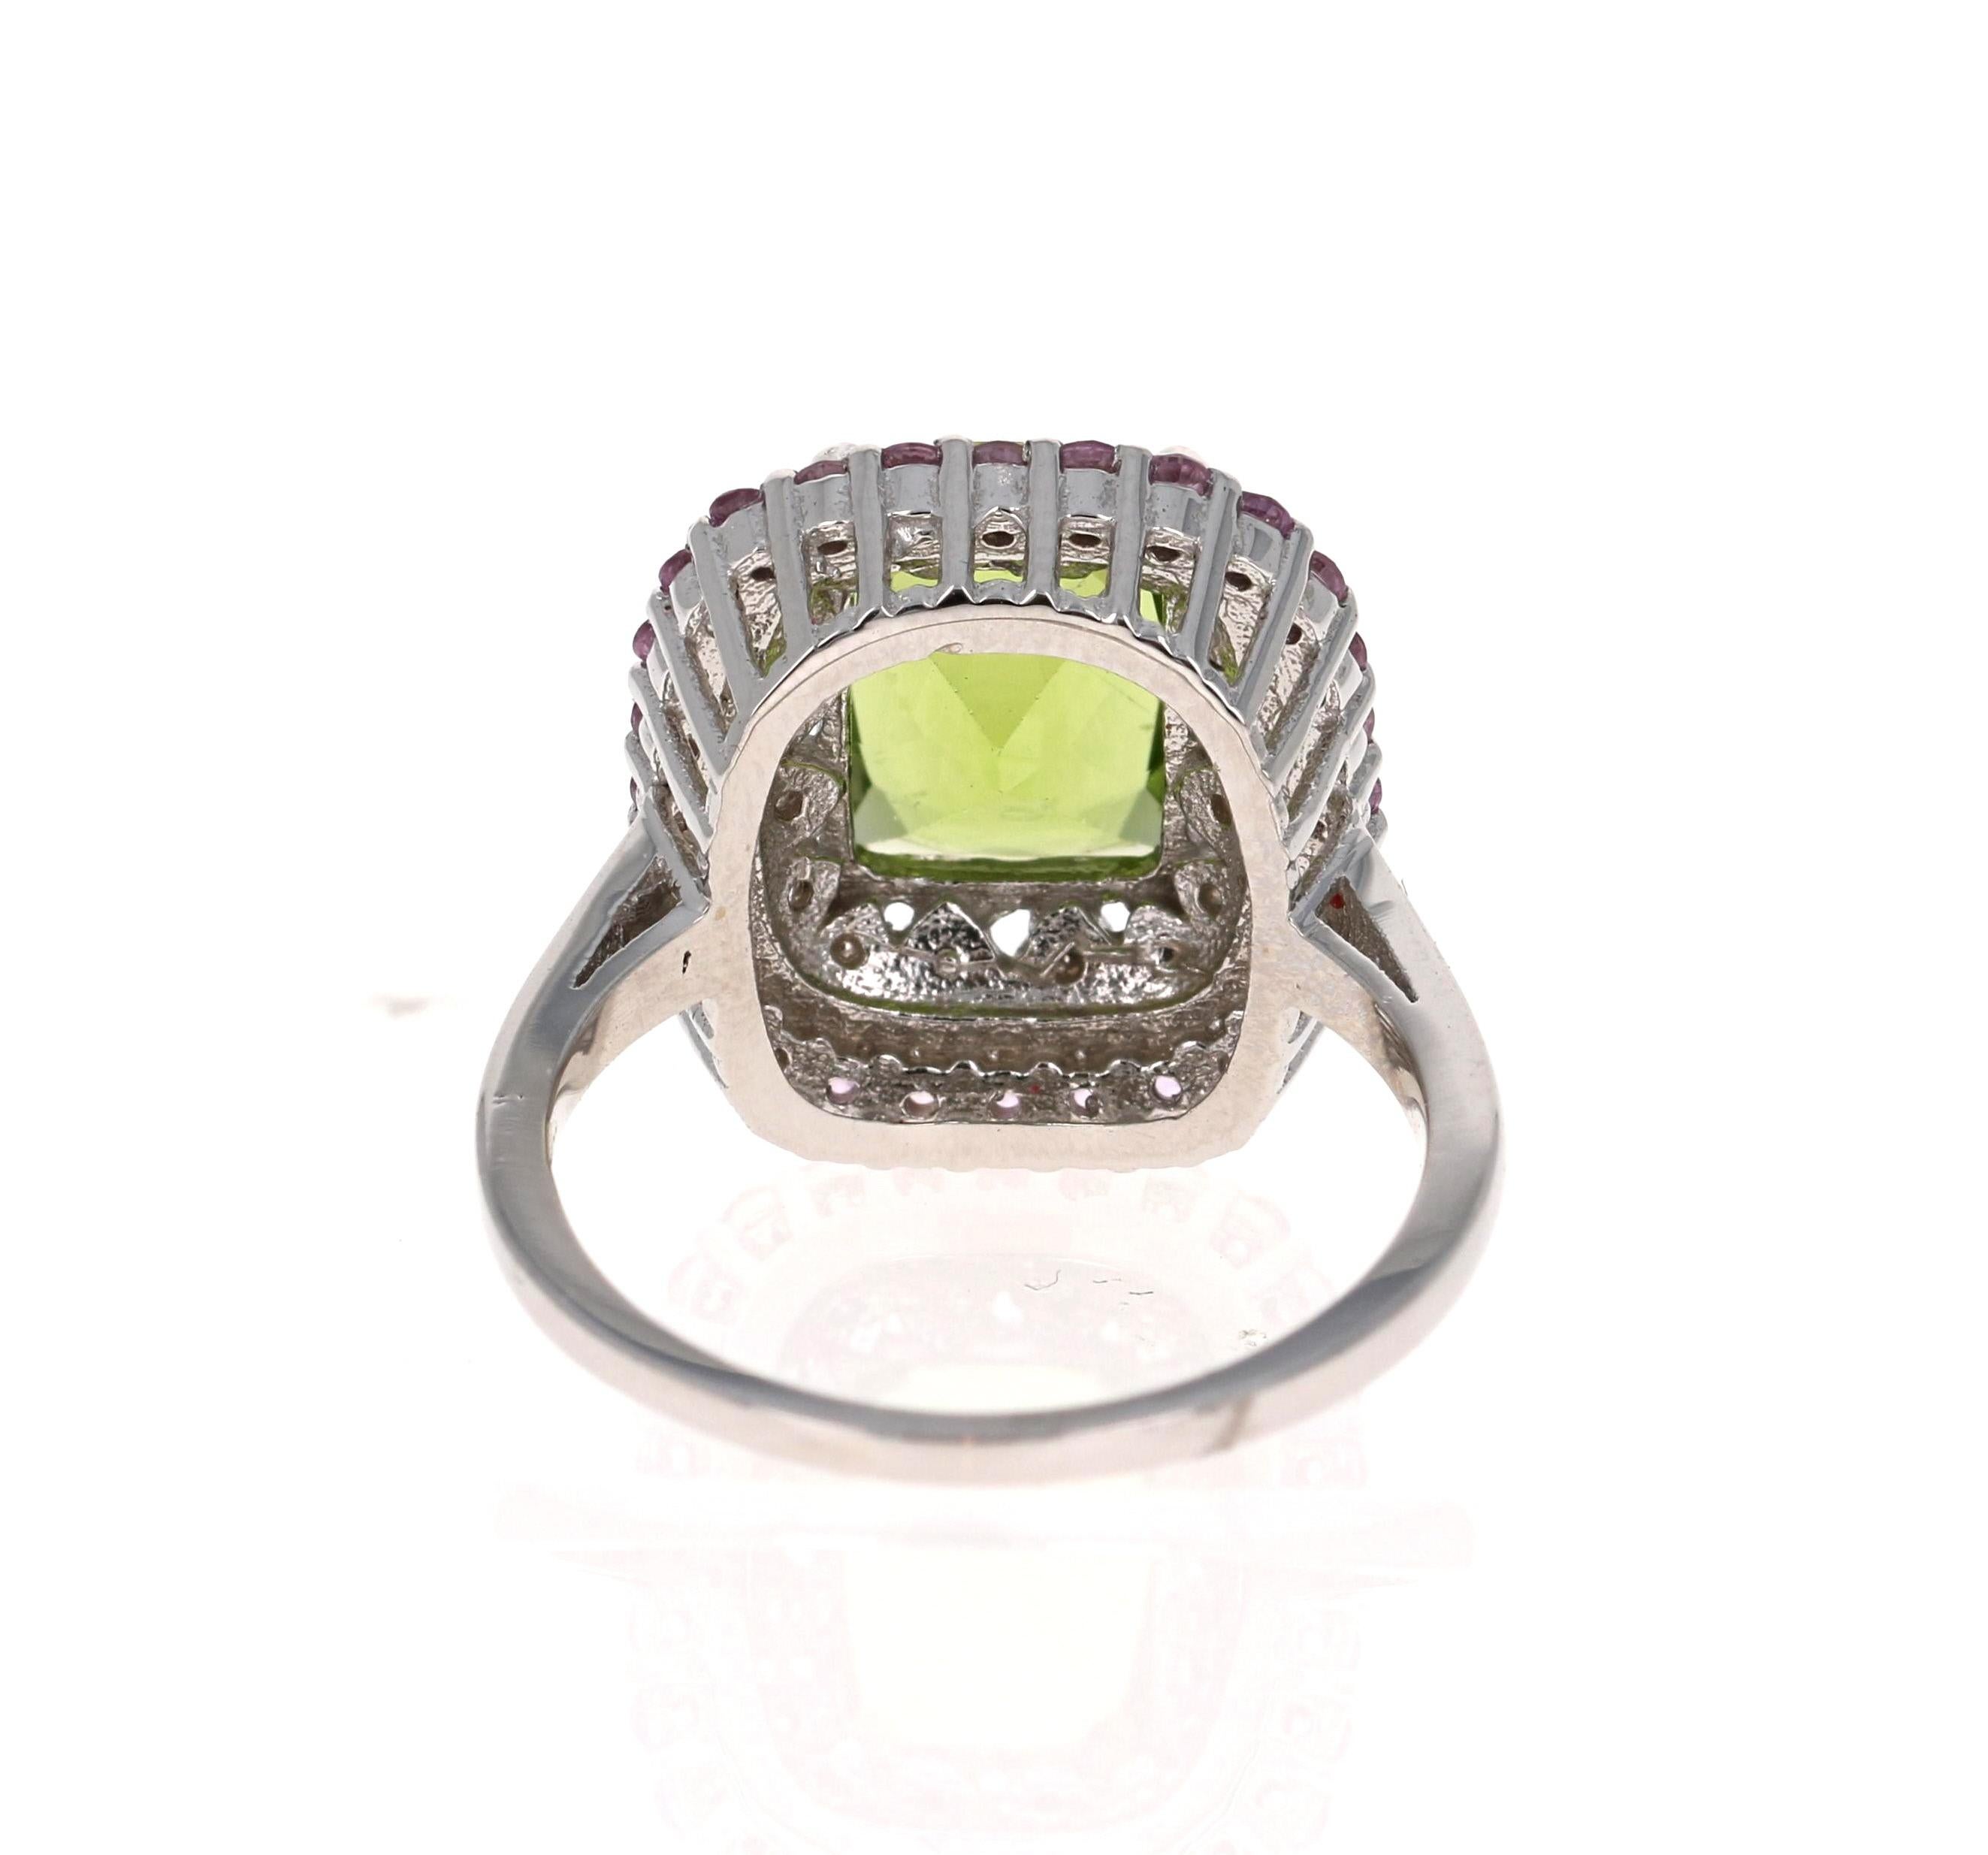 4.18 Carat Cushion Cut Peridot Sapphire and Diamond 14 Karat White Gold Ring In New Condition For Sale In Los Angeles, CA